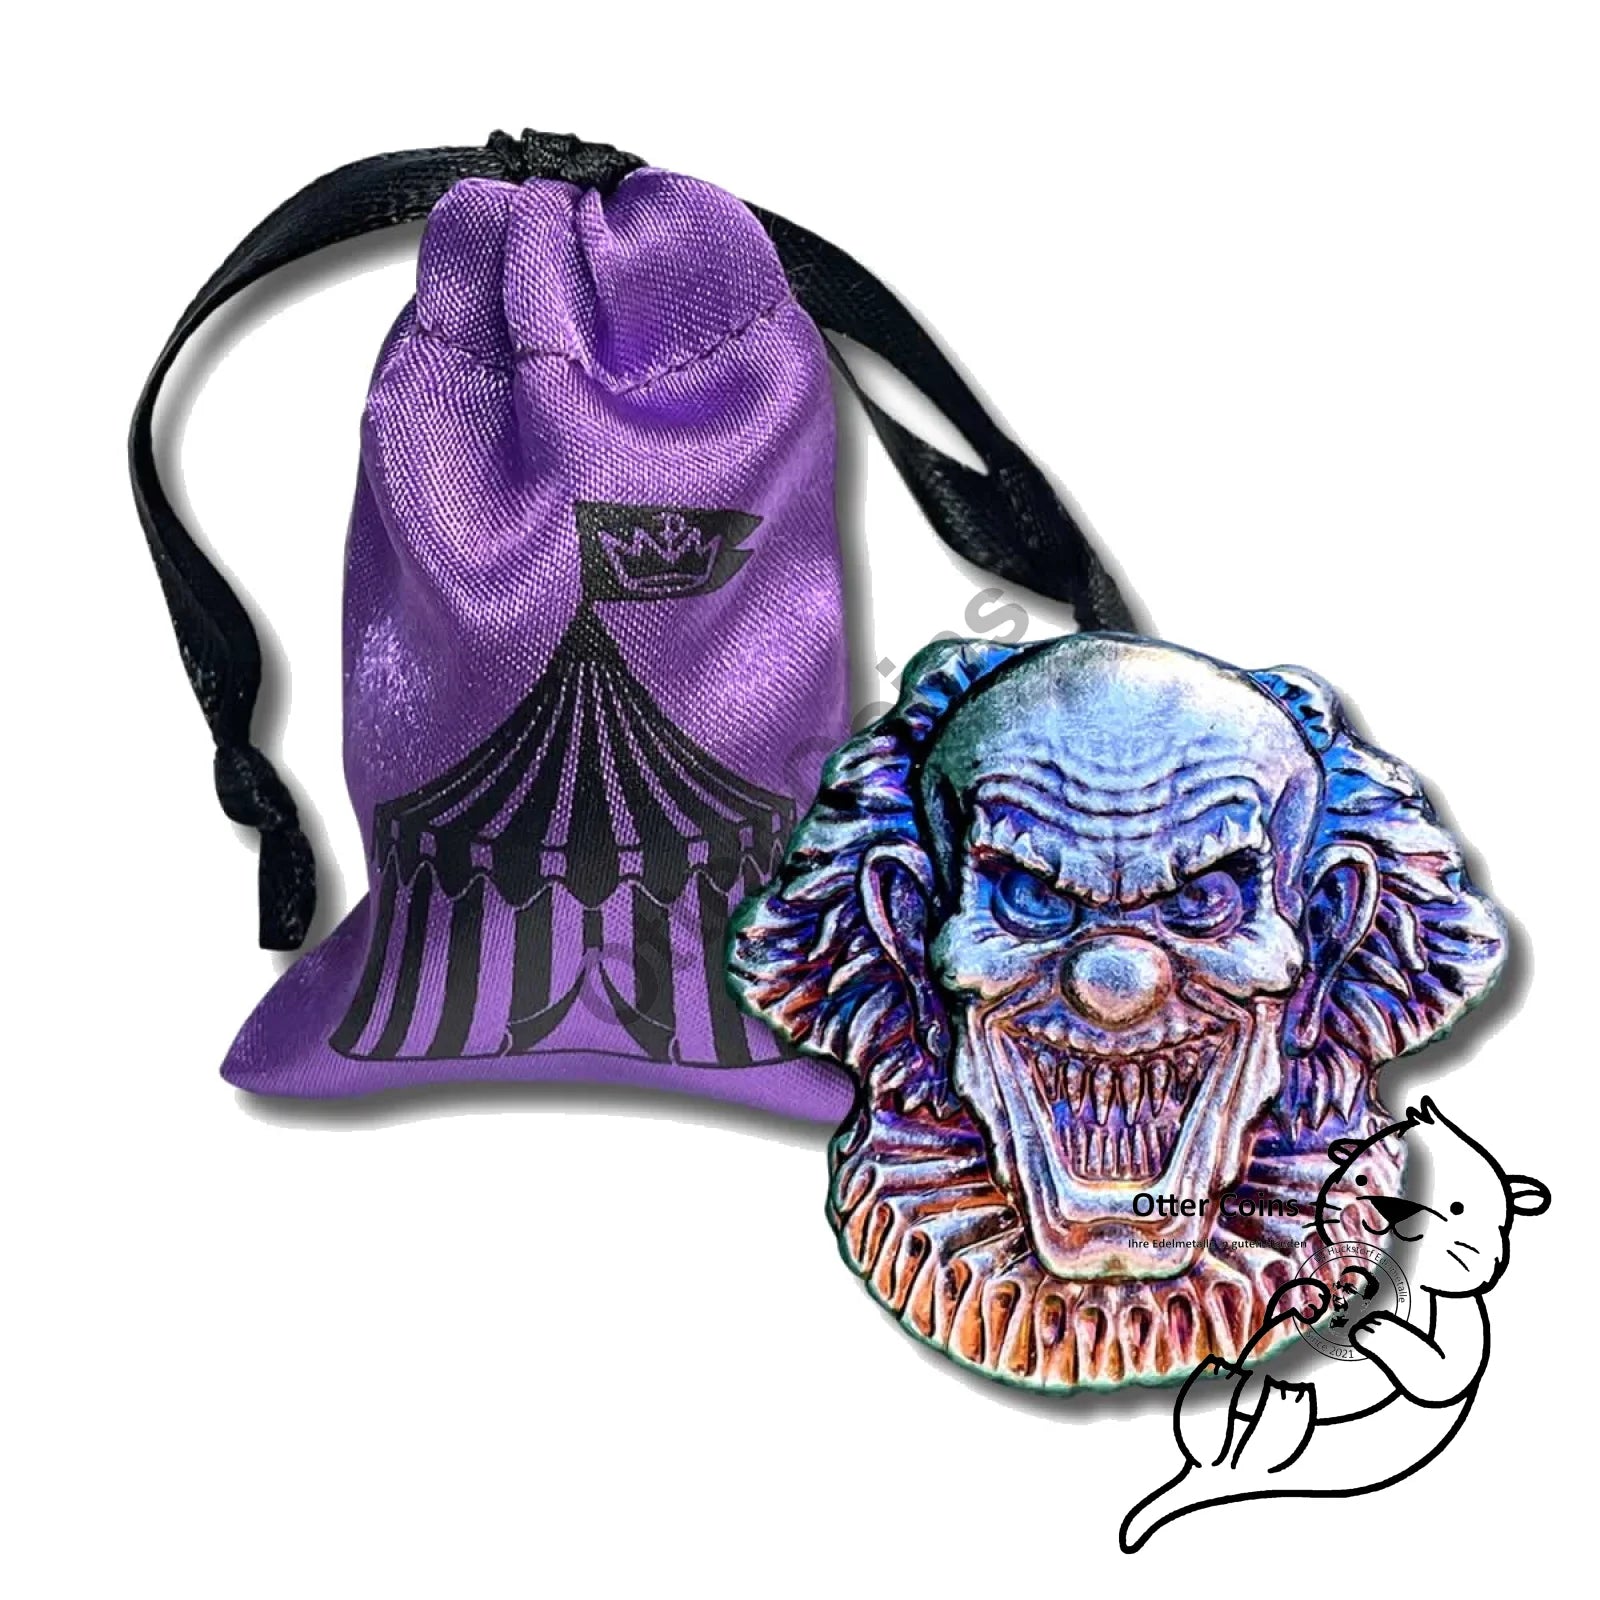 2 oz.999 Fine Silver Evil Clown with Gift Bag